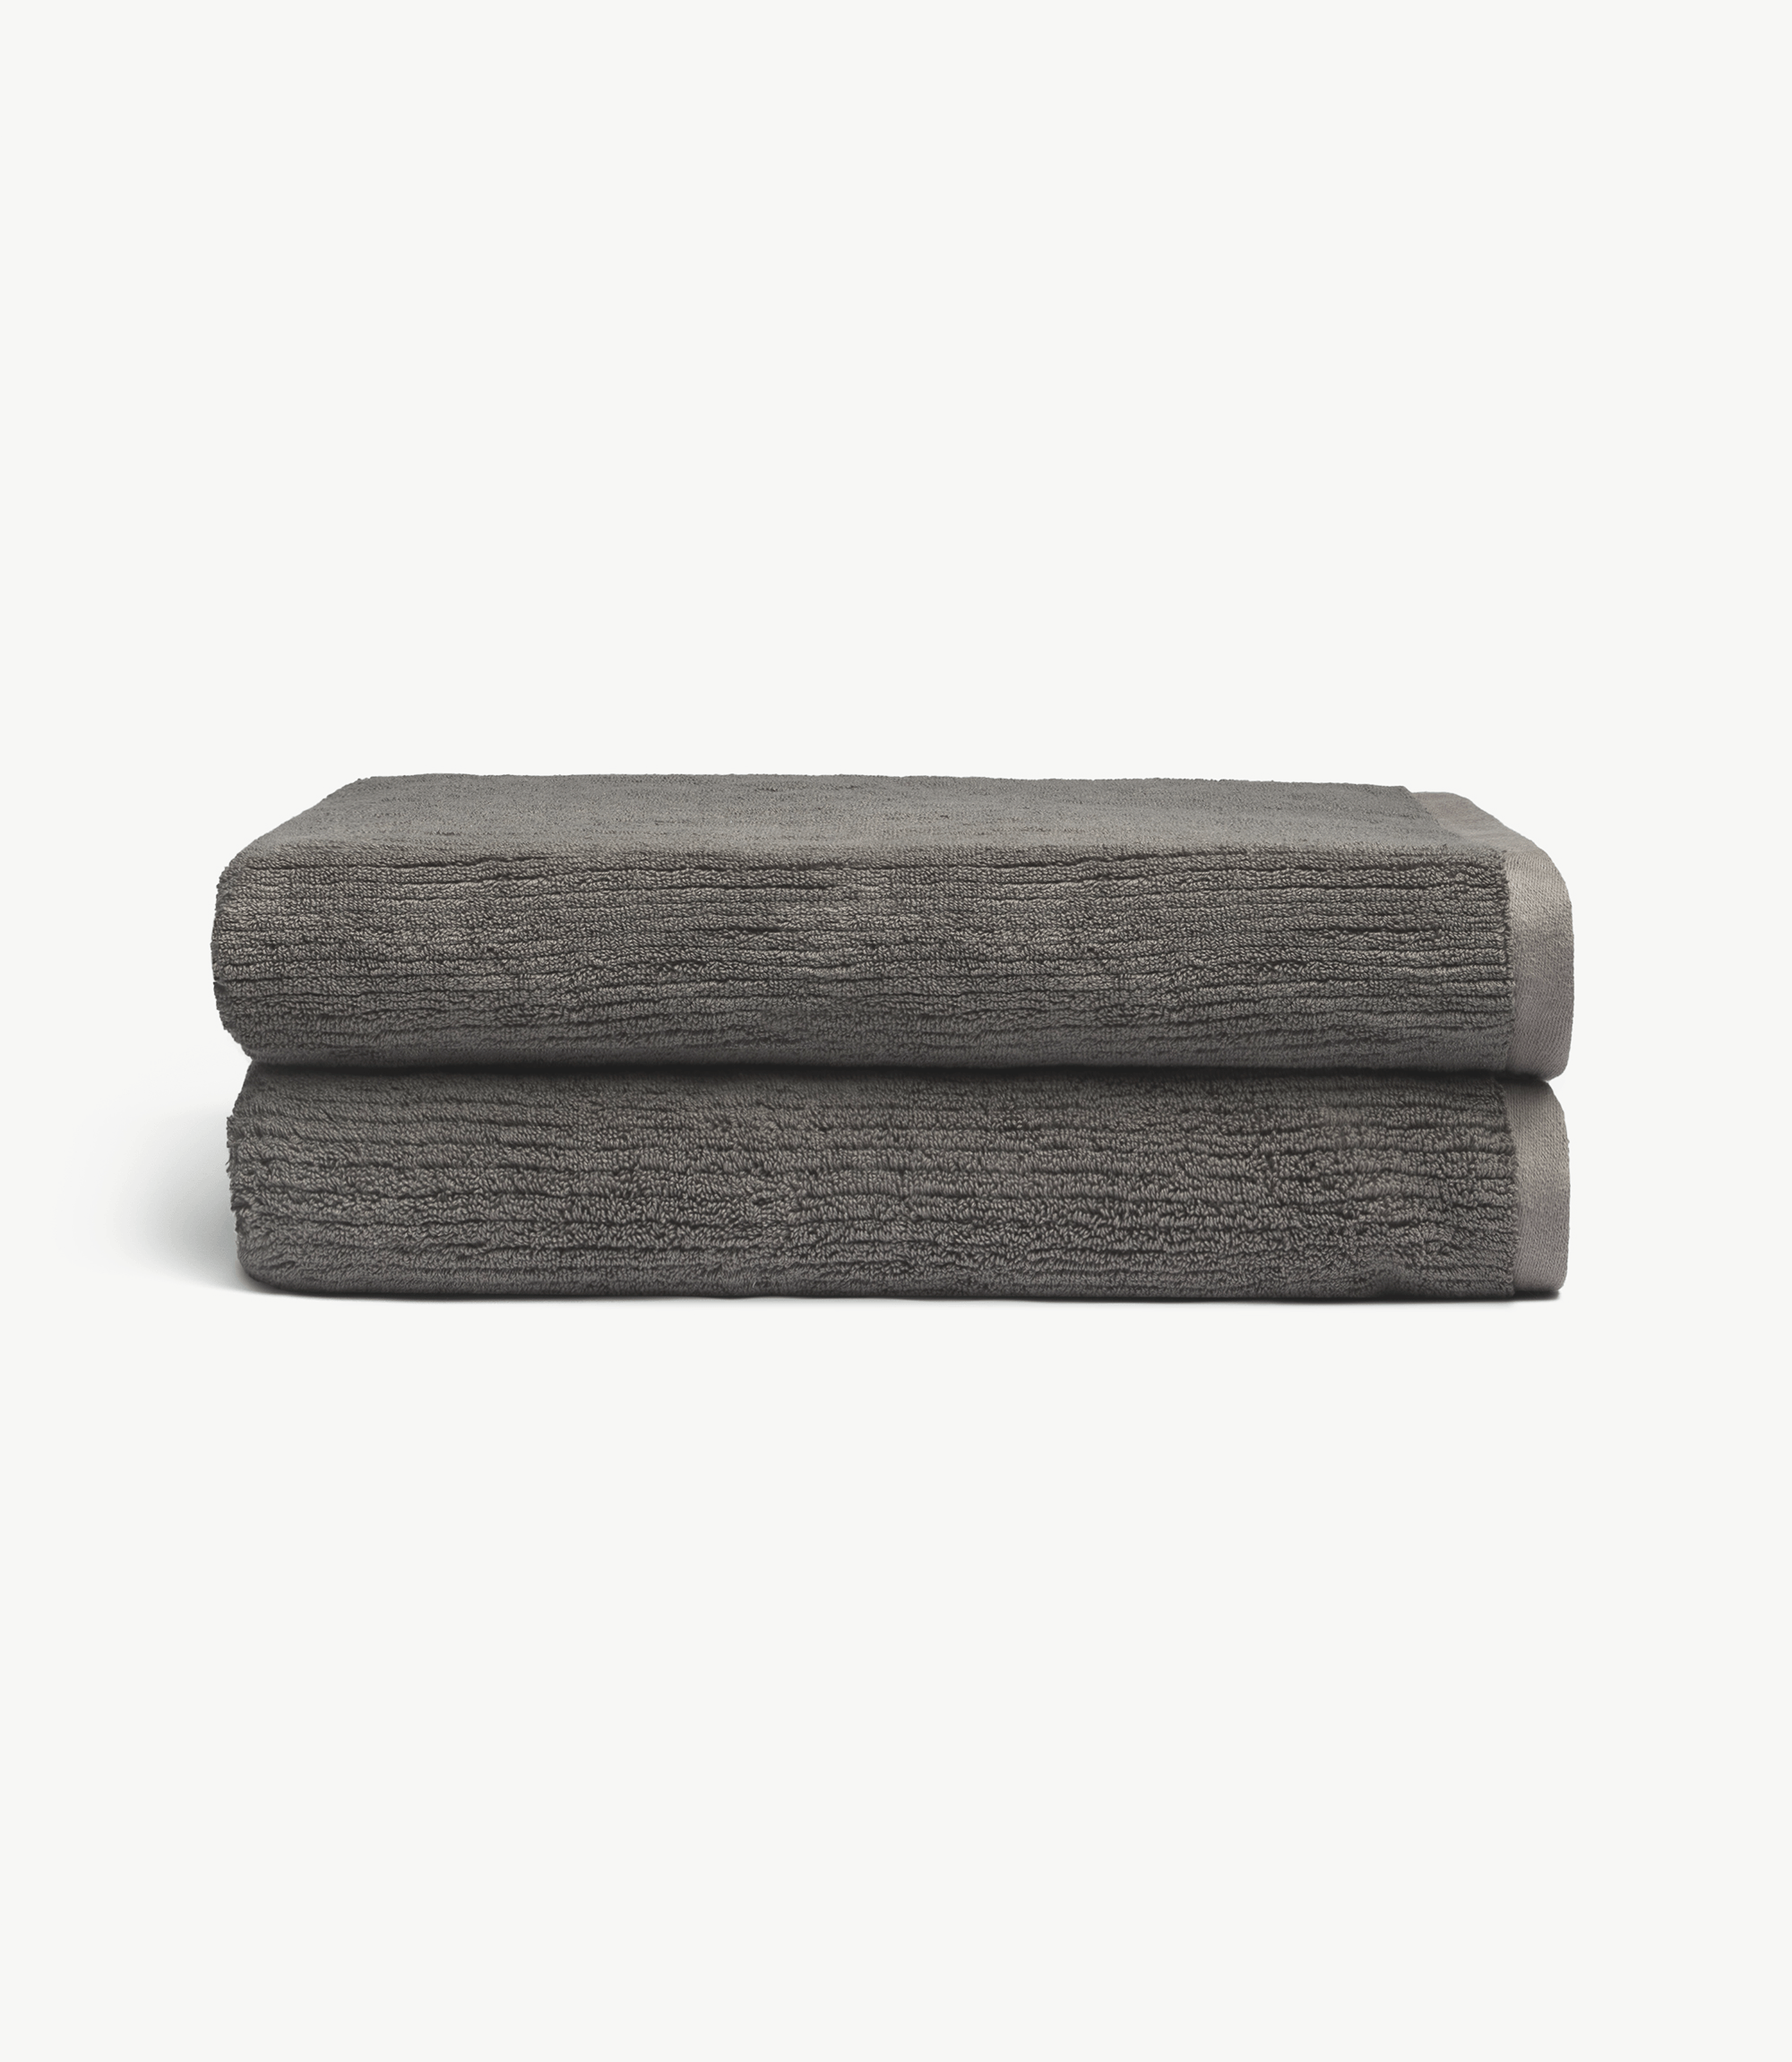 Ribbed Terry Bath Sheets in the color Charcoal. Photo of product taken with white background. |Color:Charcoal